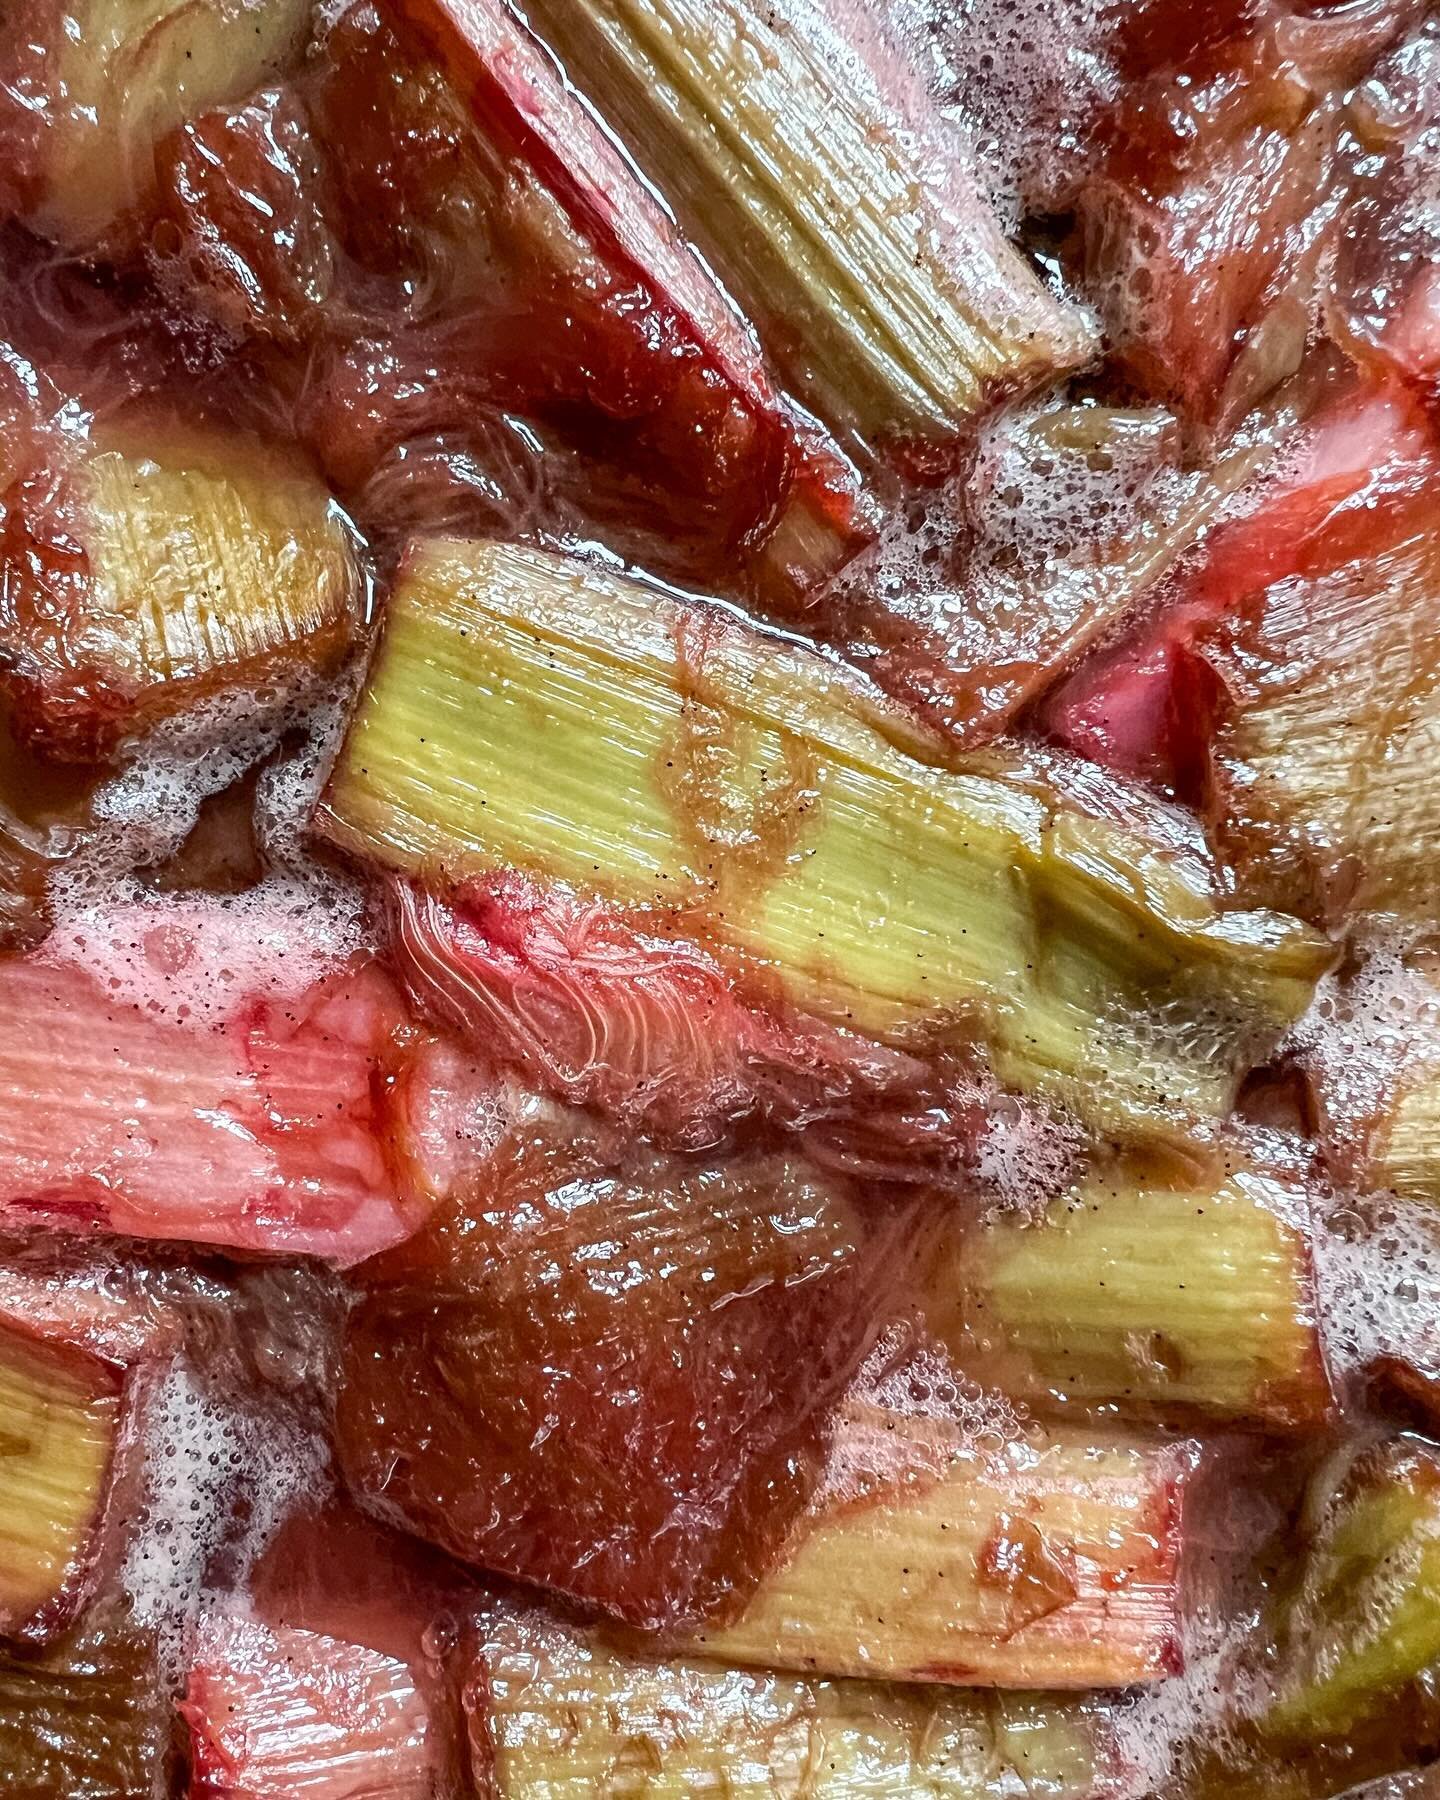 I harvested almost 12lbs of rhubarb over the weekend (yay!) and promptly made our perennial favorite, @molly.wizenberg&rsquo;s Roasted Rhubarb (as well as @csaffitz&rsquo;s Rhubarb Custard Cake, because there&rsquo;s no such thing as too much rhubarb